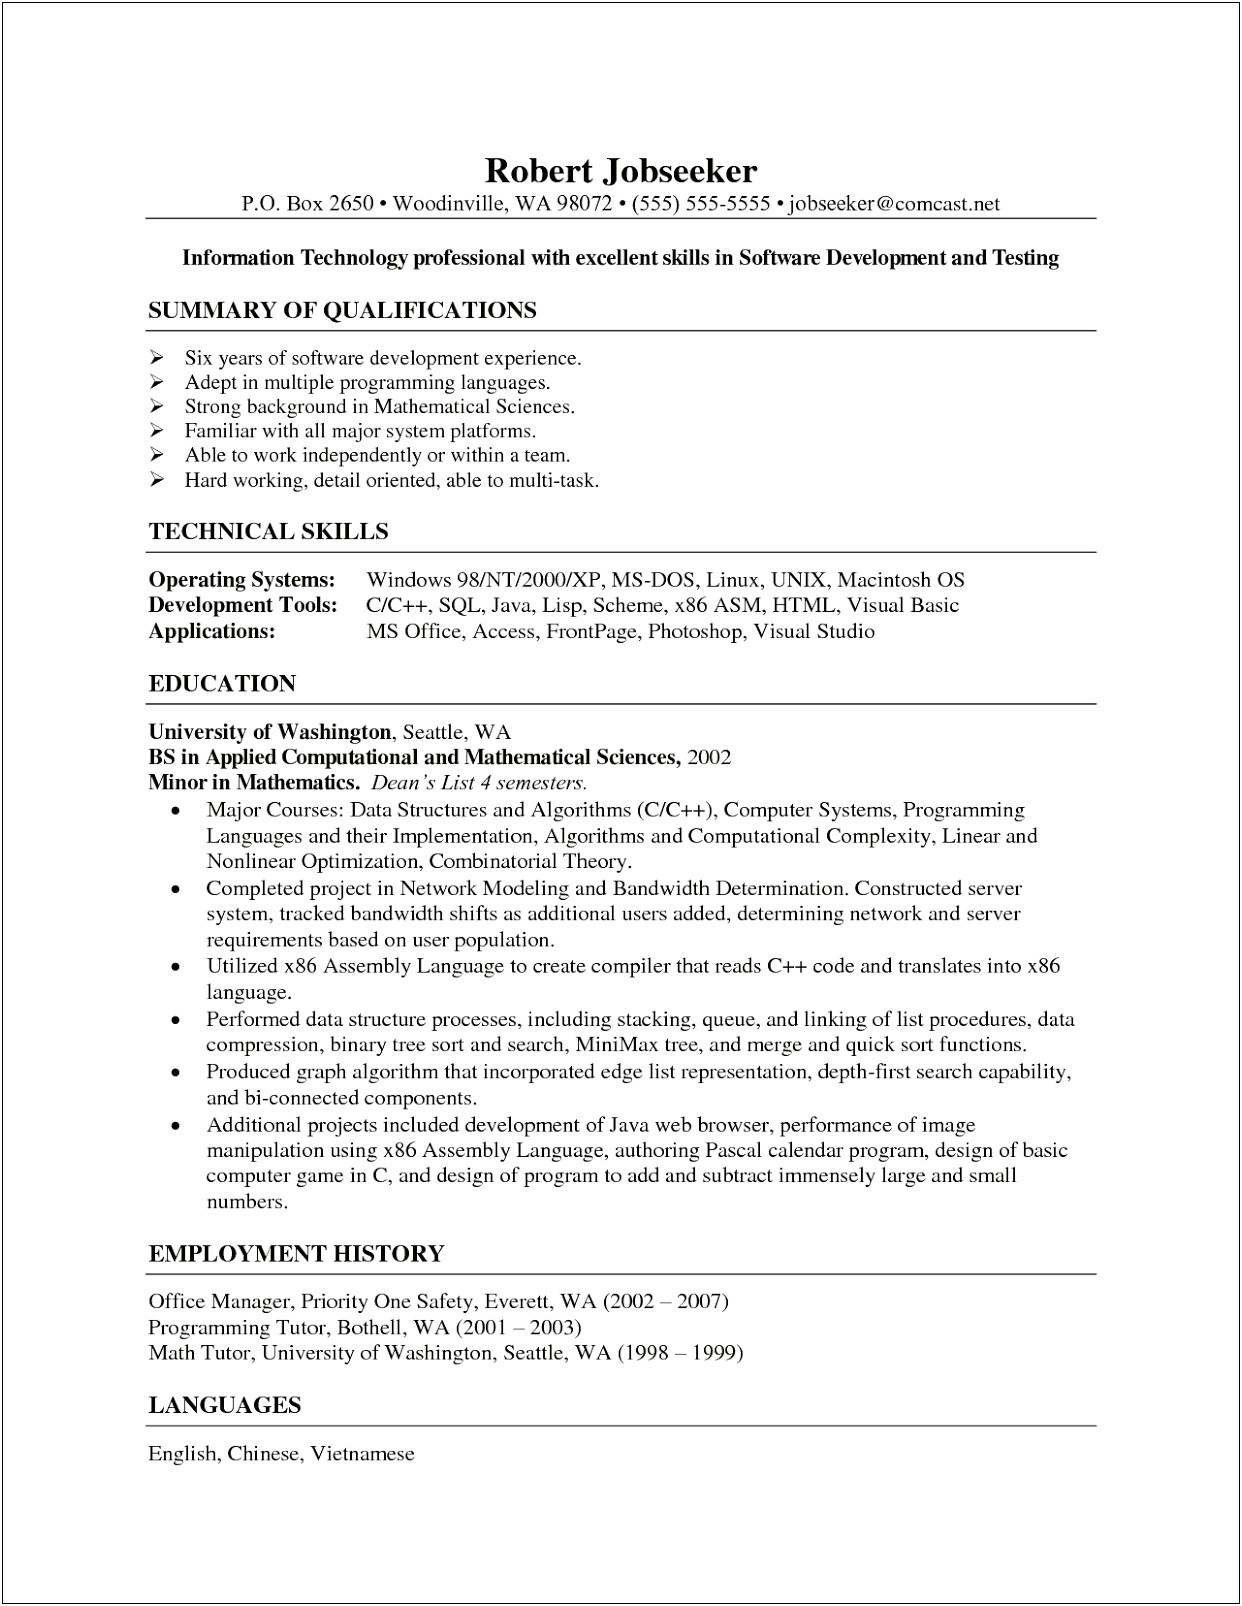 Resume Letter Examples For Experienced Information Technology